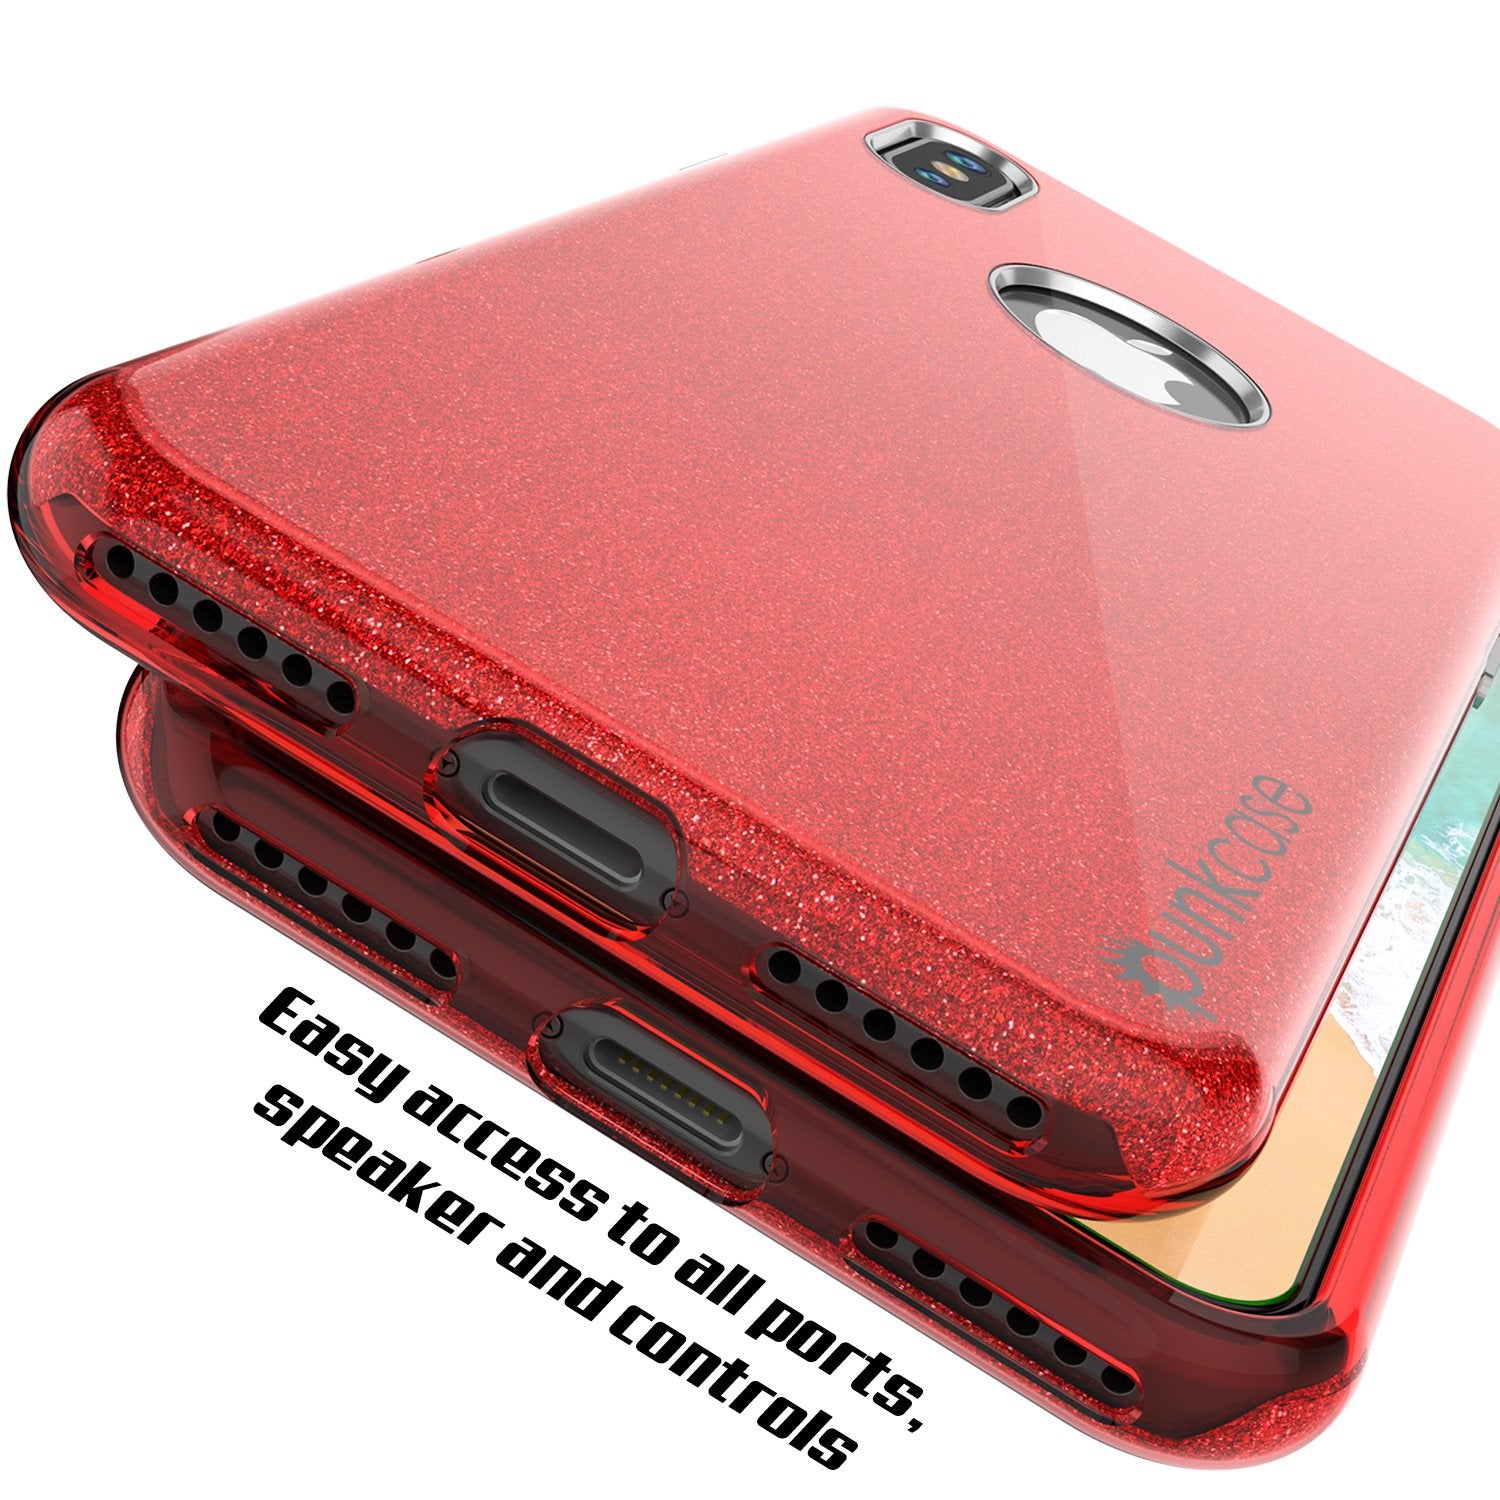 iPhone X Case, Punkcase Galactic 2.0 Series Ultra Slim w/ Tempered Glass Screen Protector | [Red] - PunkCase NZ